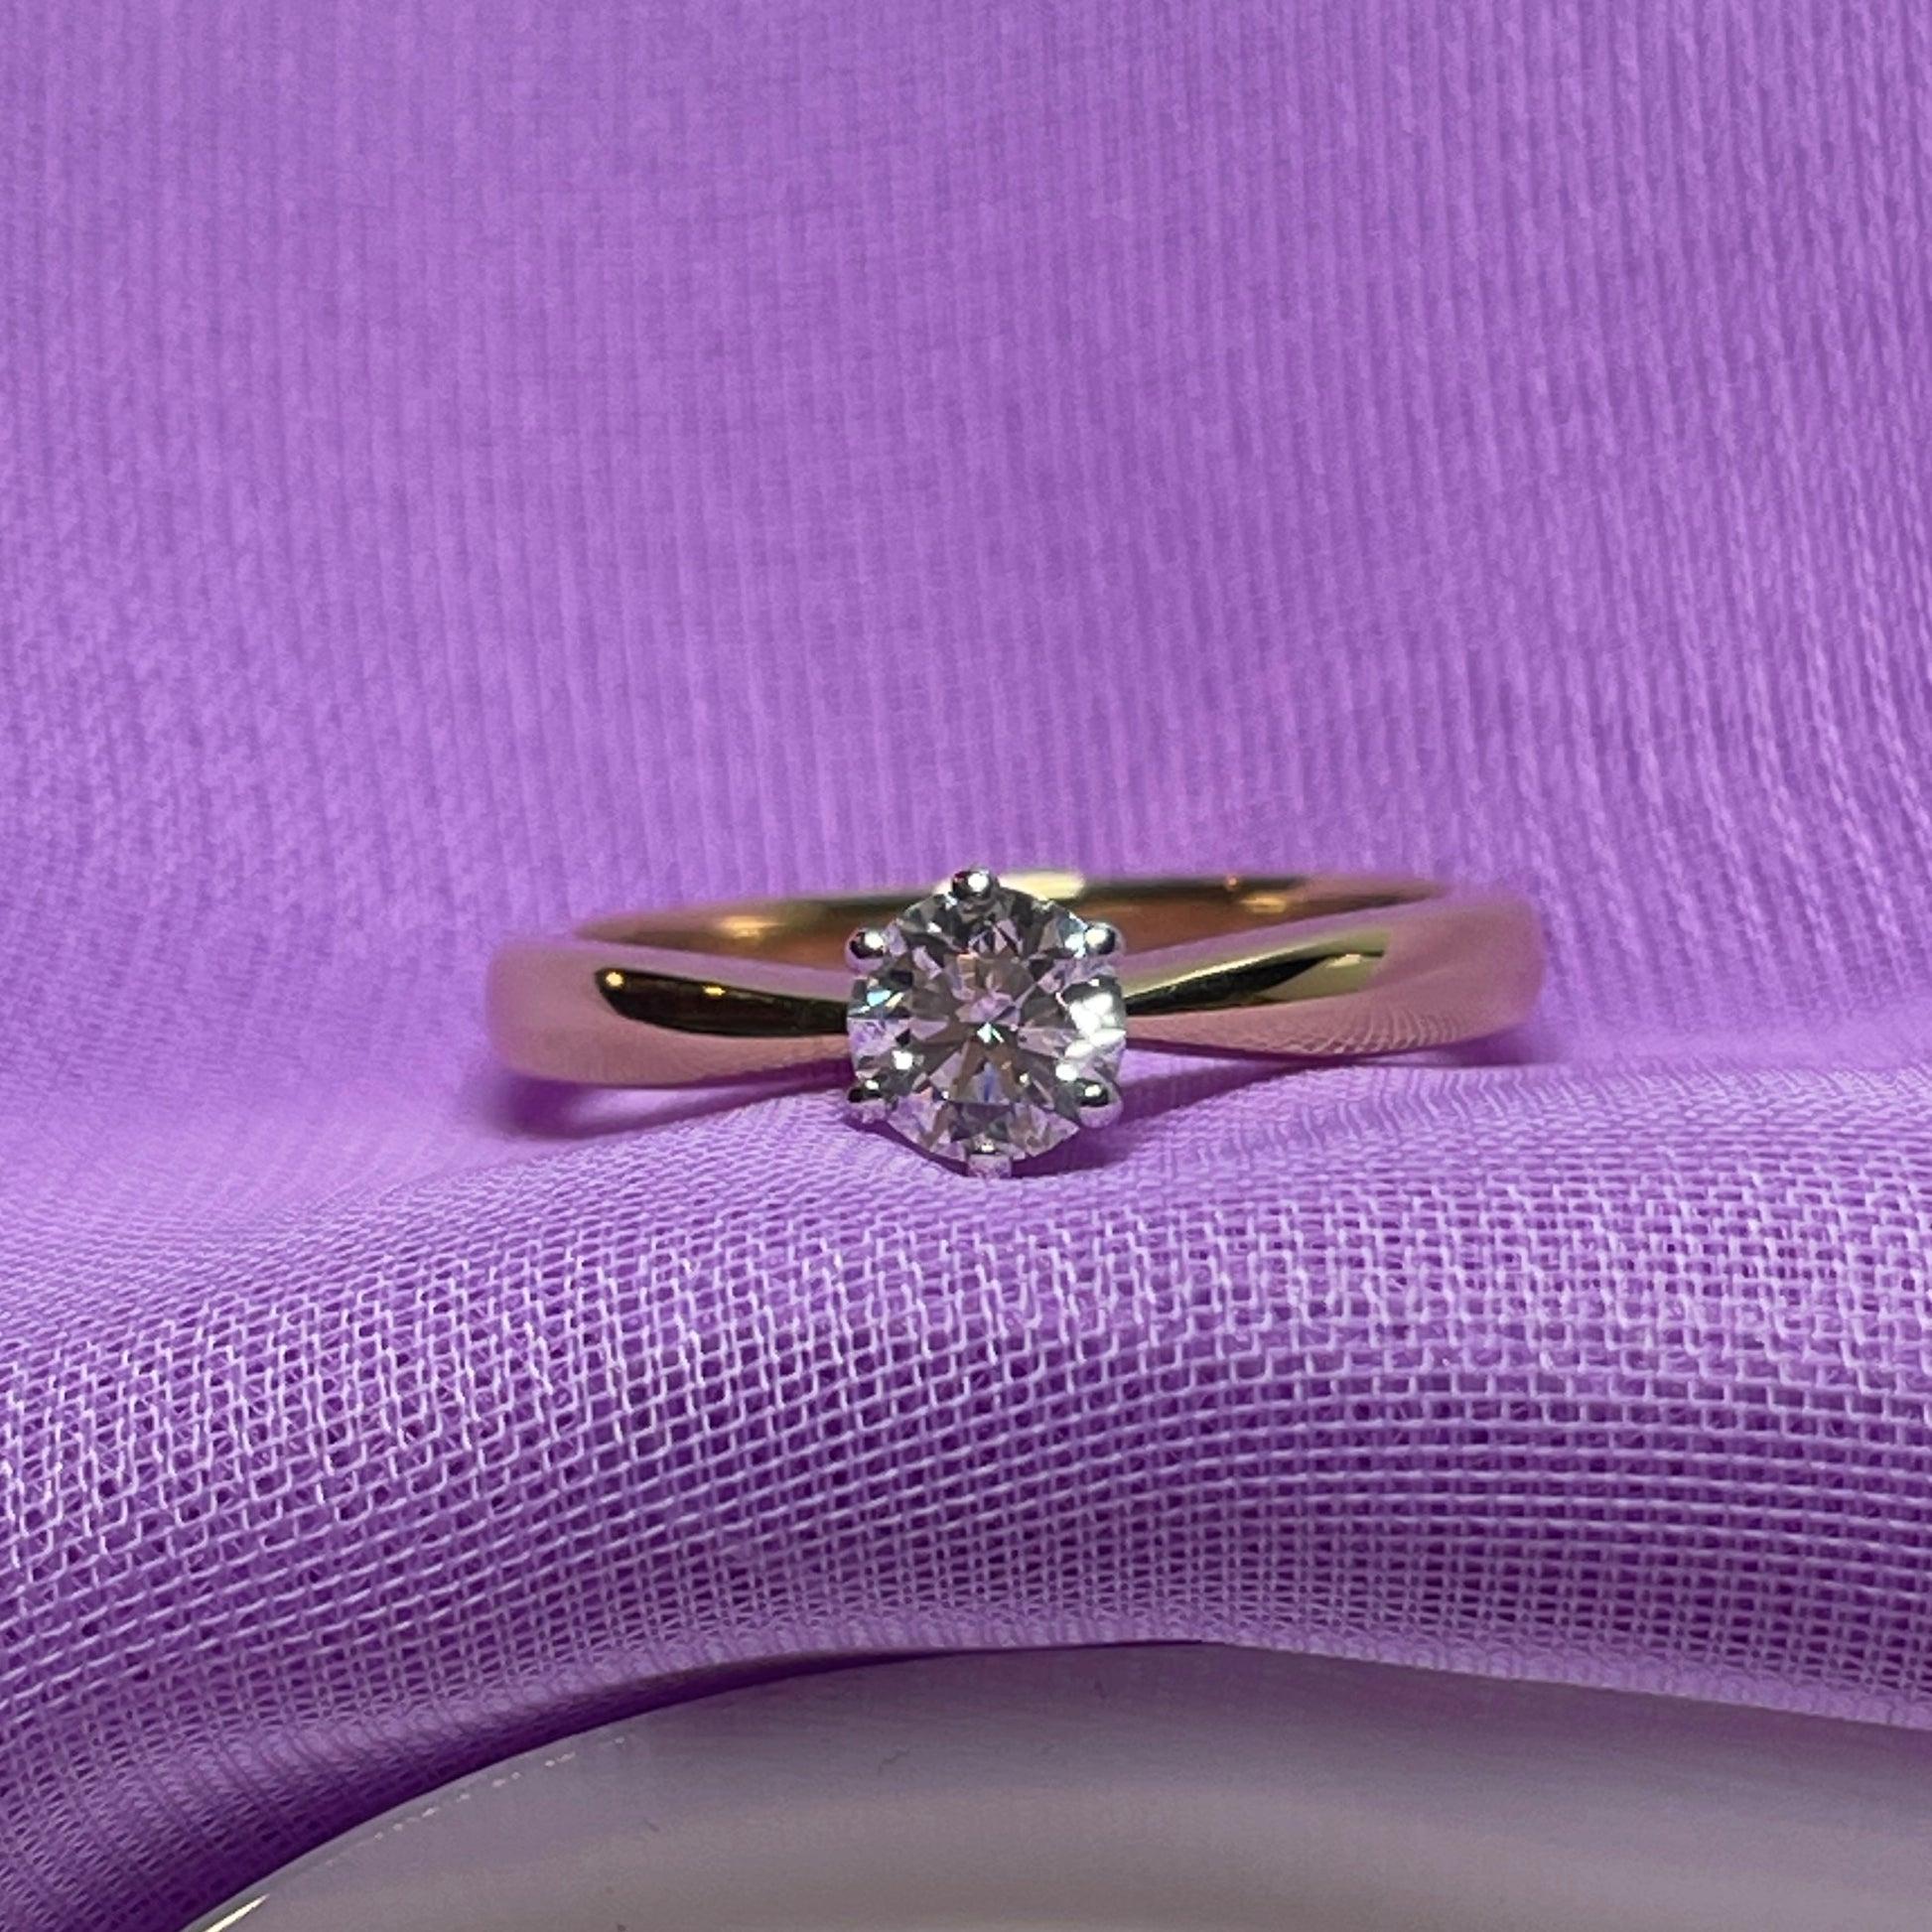 Certified diamond solitaire ring half carat single stone yellow gold diamond engagement 50 points